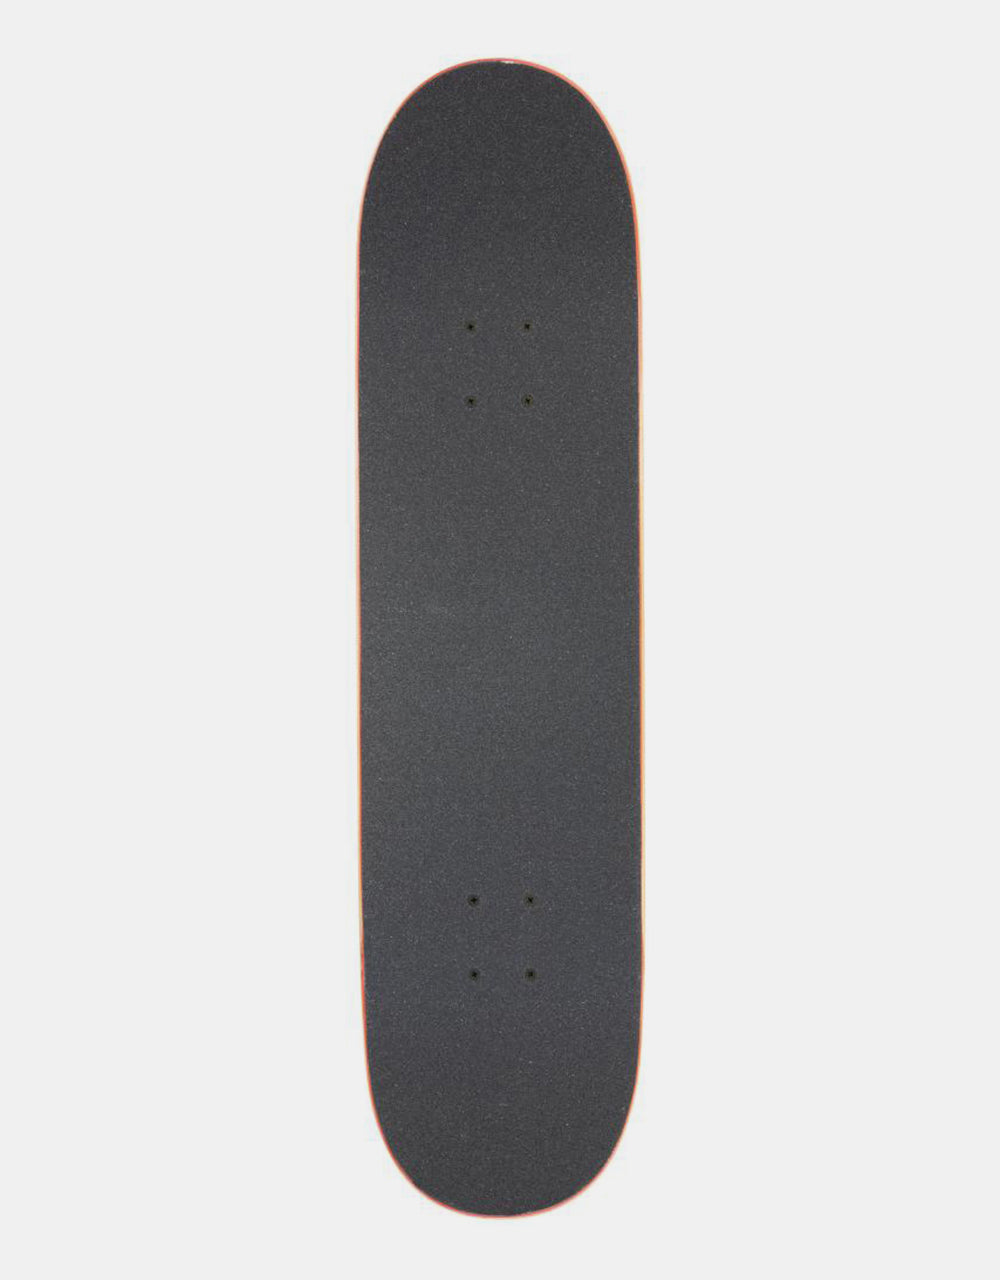 Arbor Whiskey Experience Complete Skateboard - 8.25"